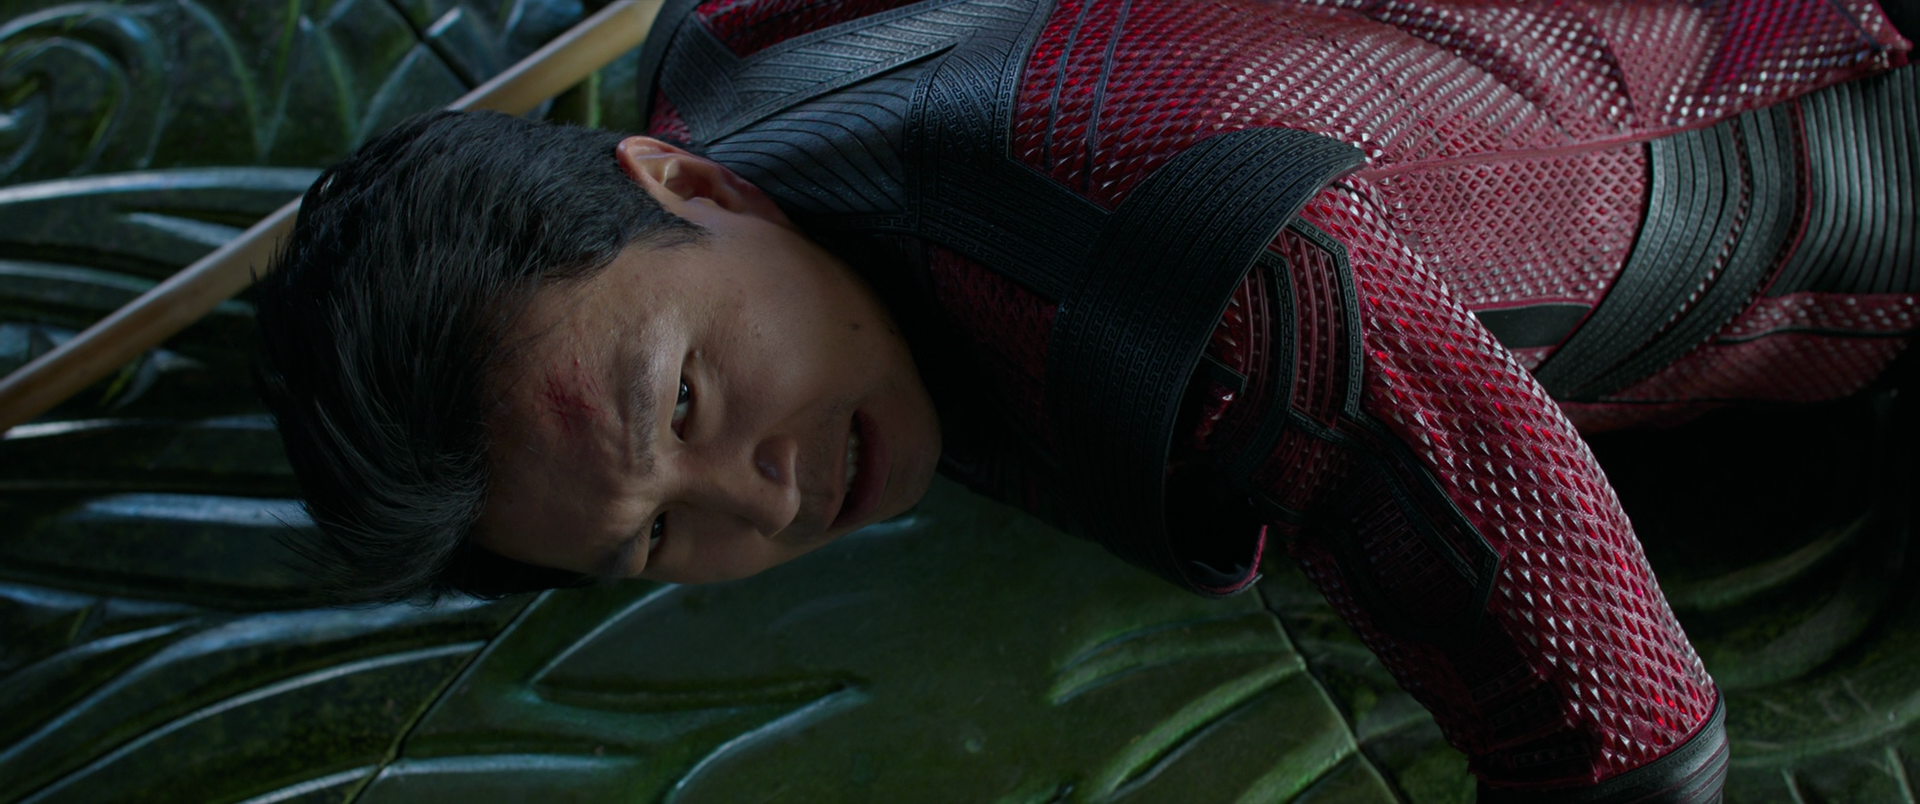 Shang-Chi (Simu Liu) is knocked down by Wenwu (Tony Leung) in Shang-Chi and the Legend of the Ten Rings (2021), Marvel Entertainment via Blu-ray